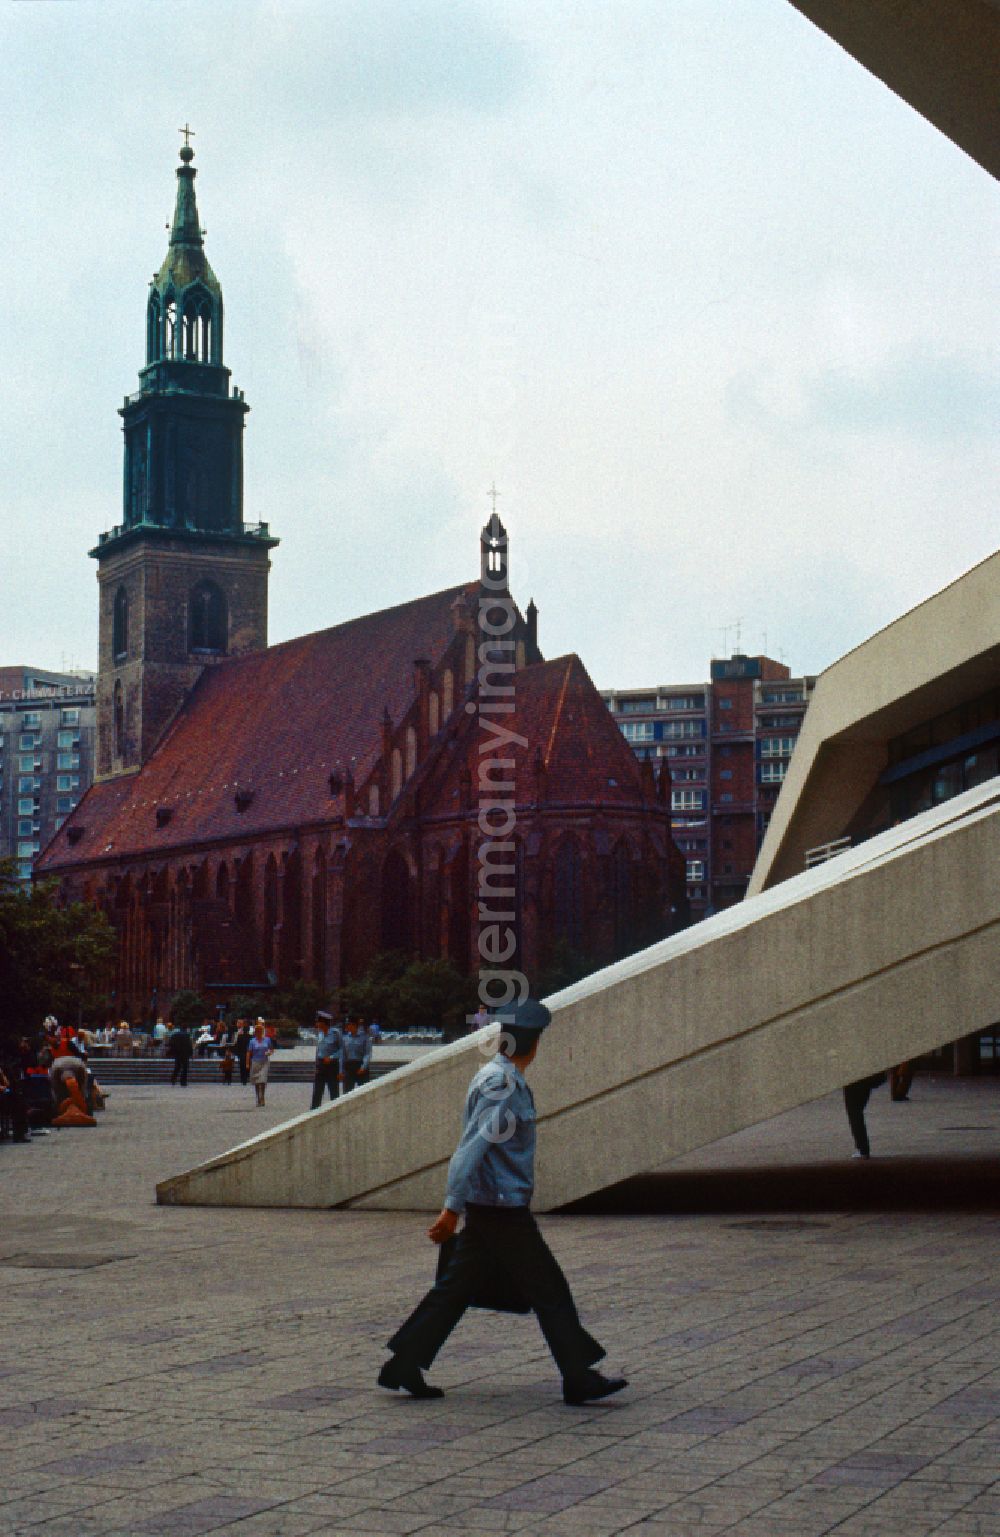 GDR image archive: Berlin - St. Mary's Church on Alexanderplatz and a policeman in East Berlin on the territory of the former GDR, German Democratic Republic